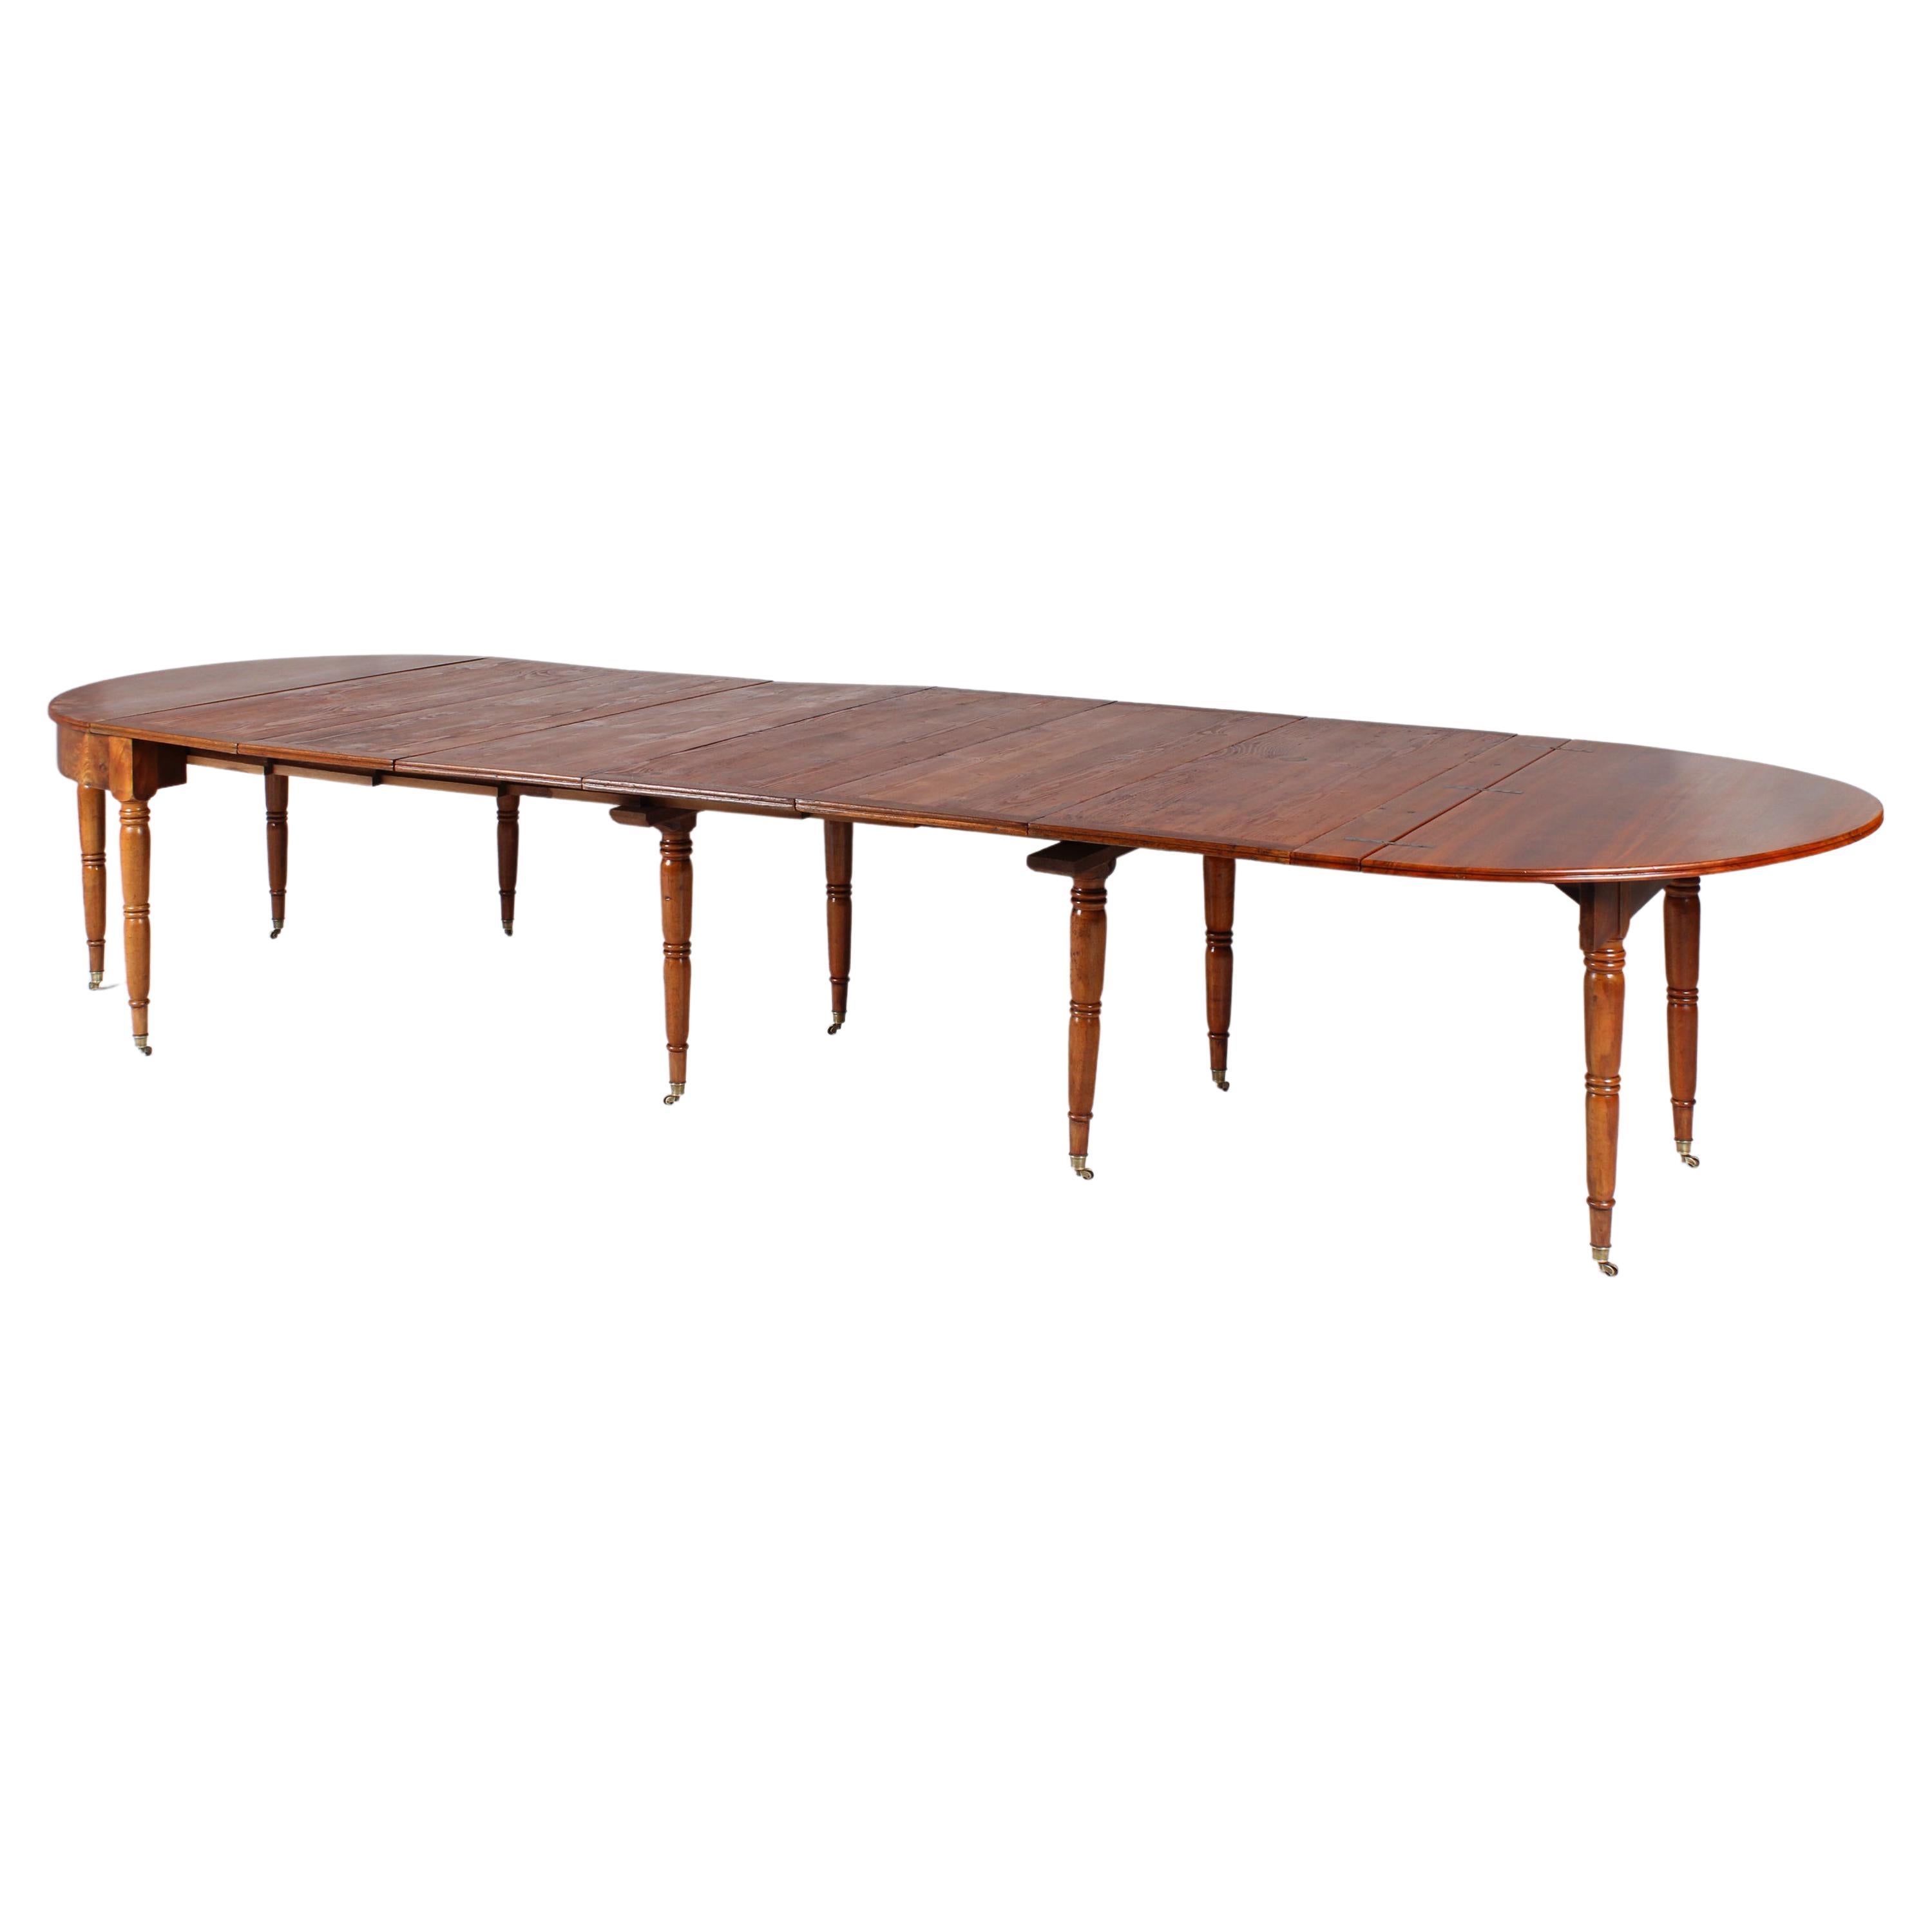 Large 19th Century Dining Table, Walnut, 12-16 People